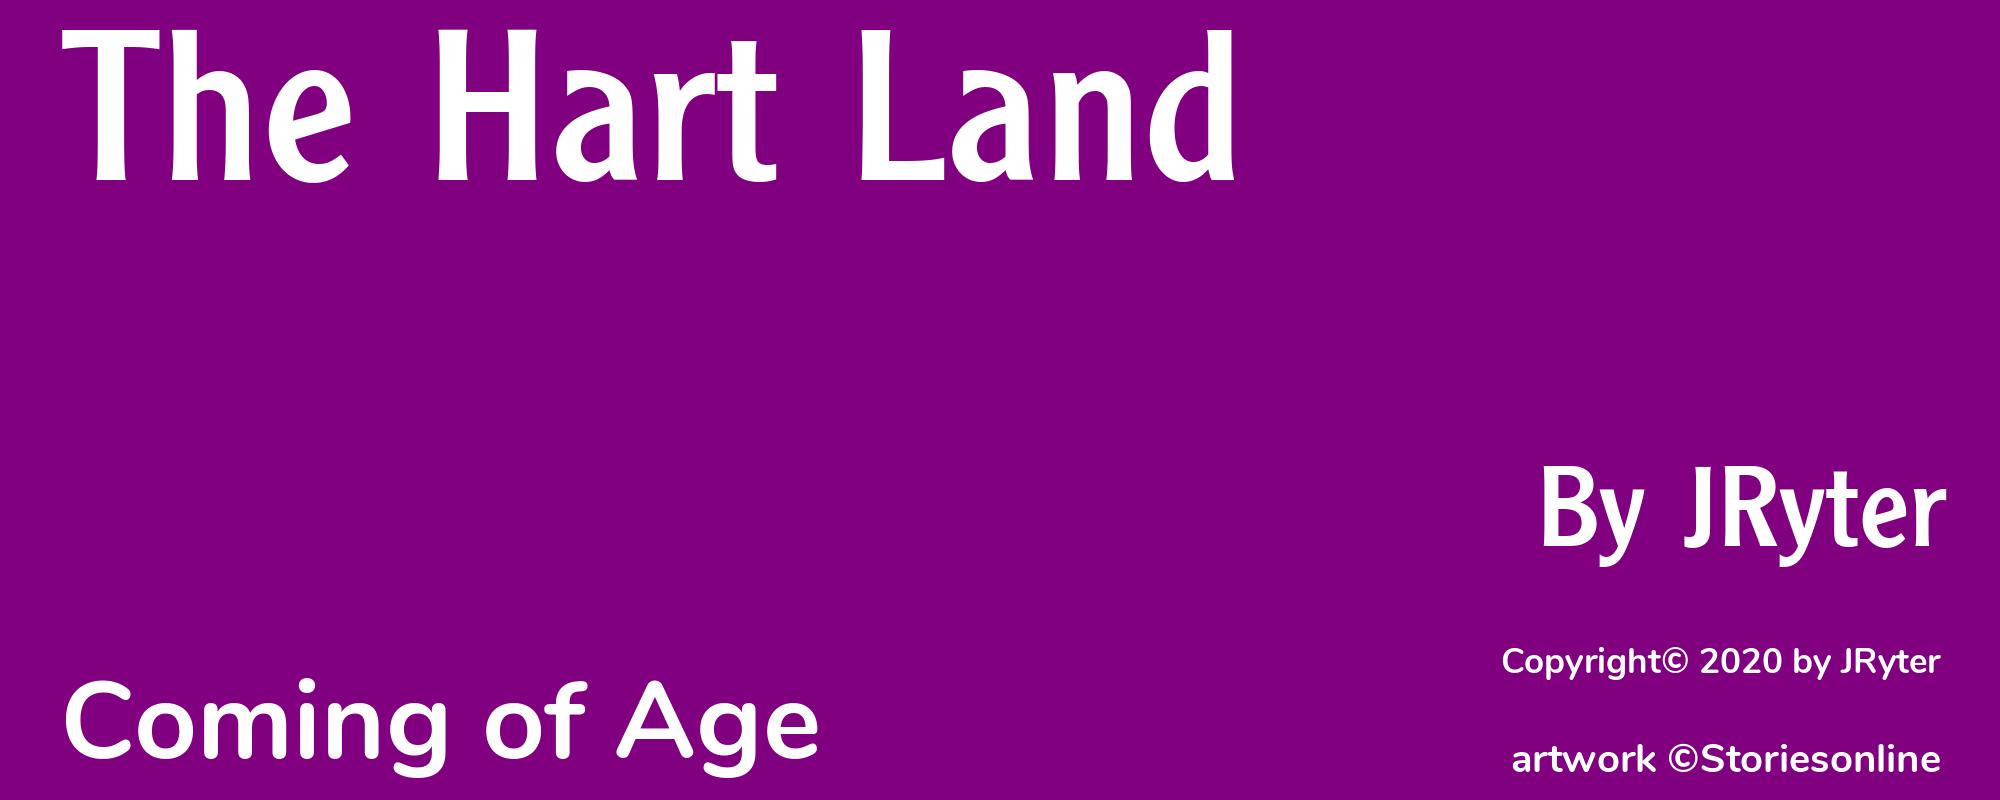 The Hart Land - Cover